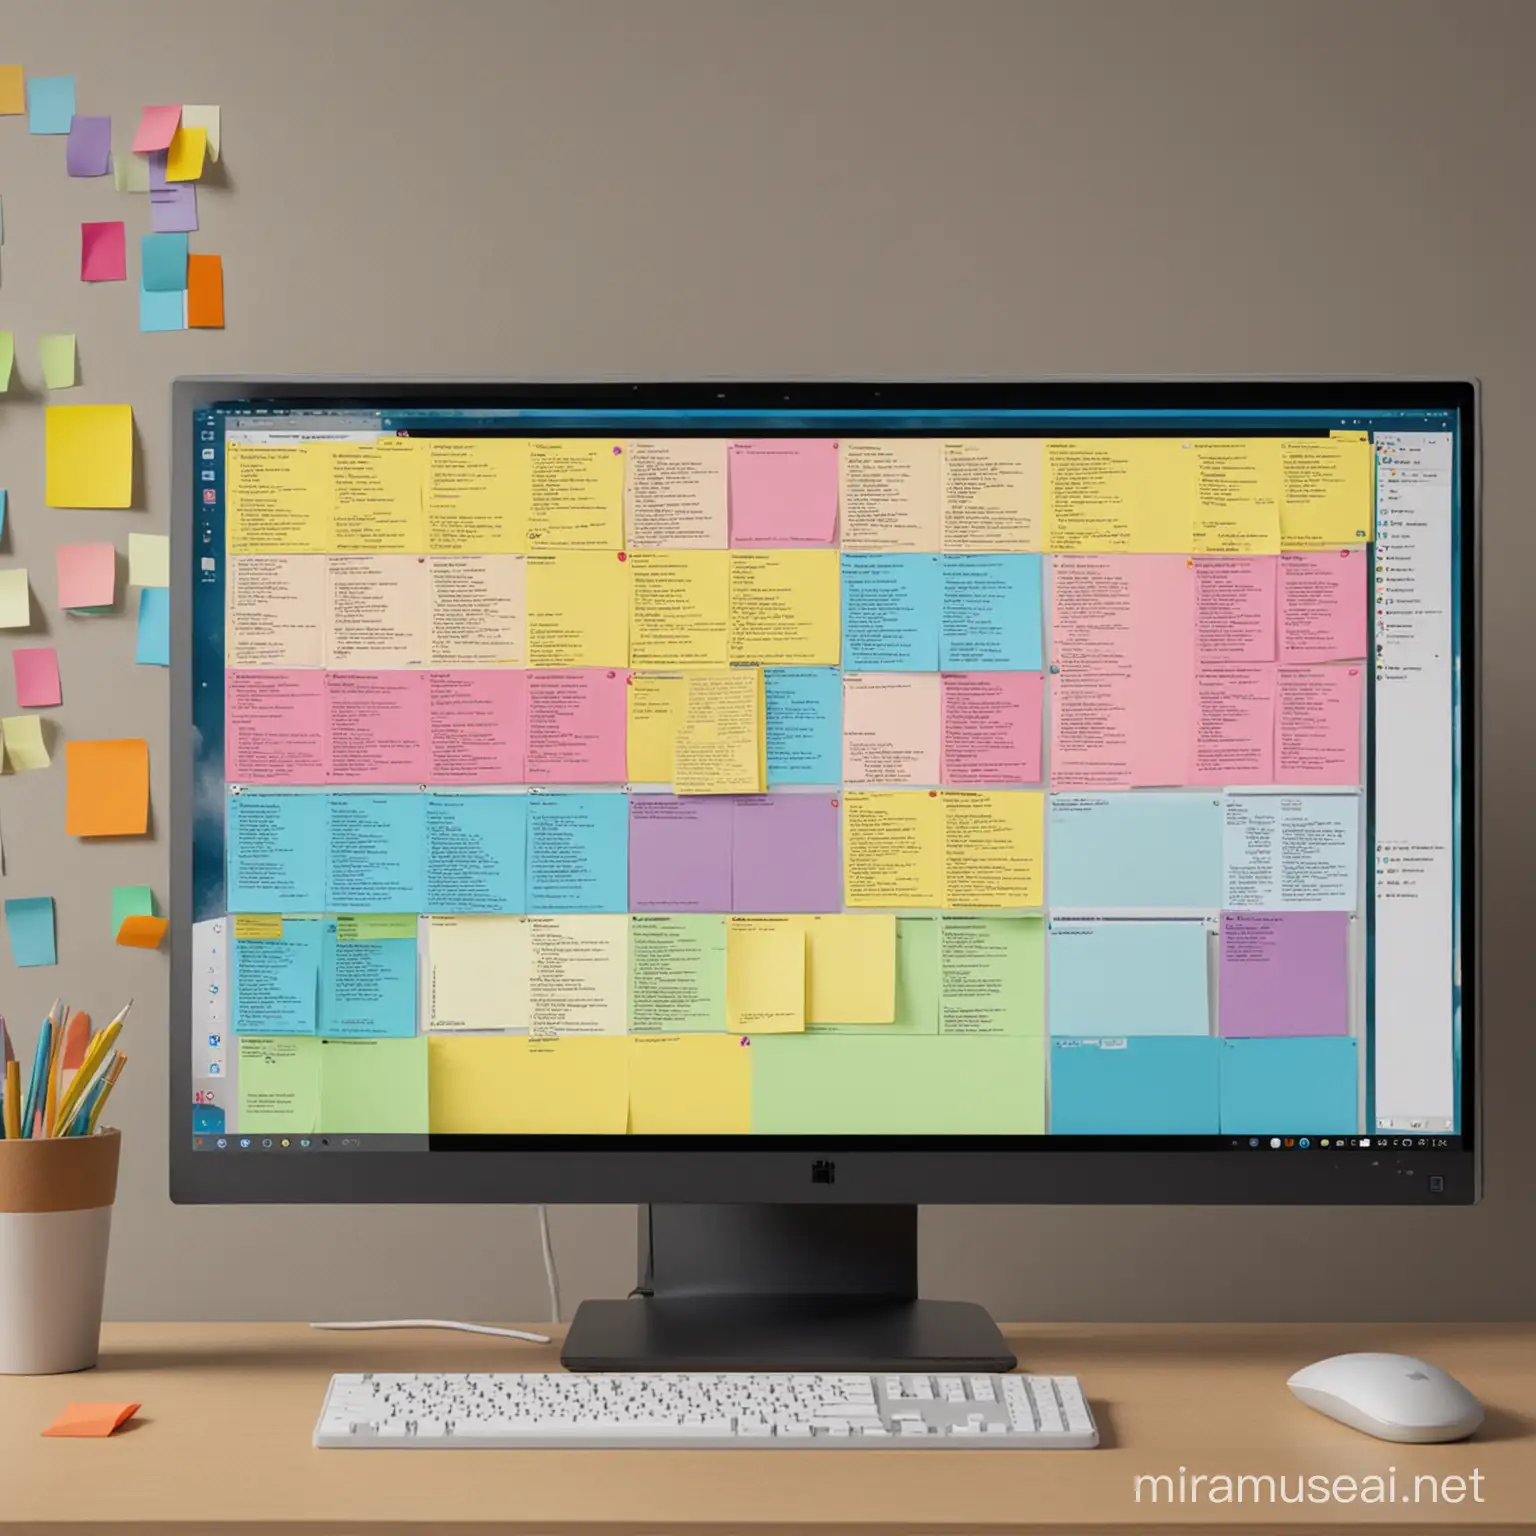 Colorful Microsoft Desktop with Sticky Notes and Texts